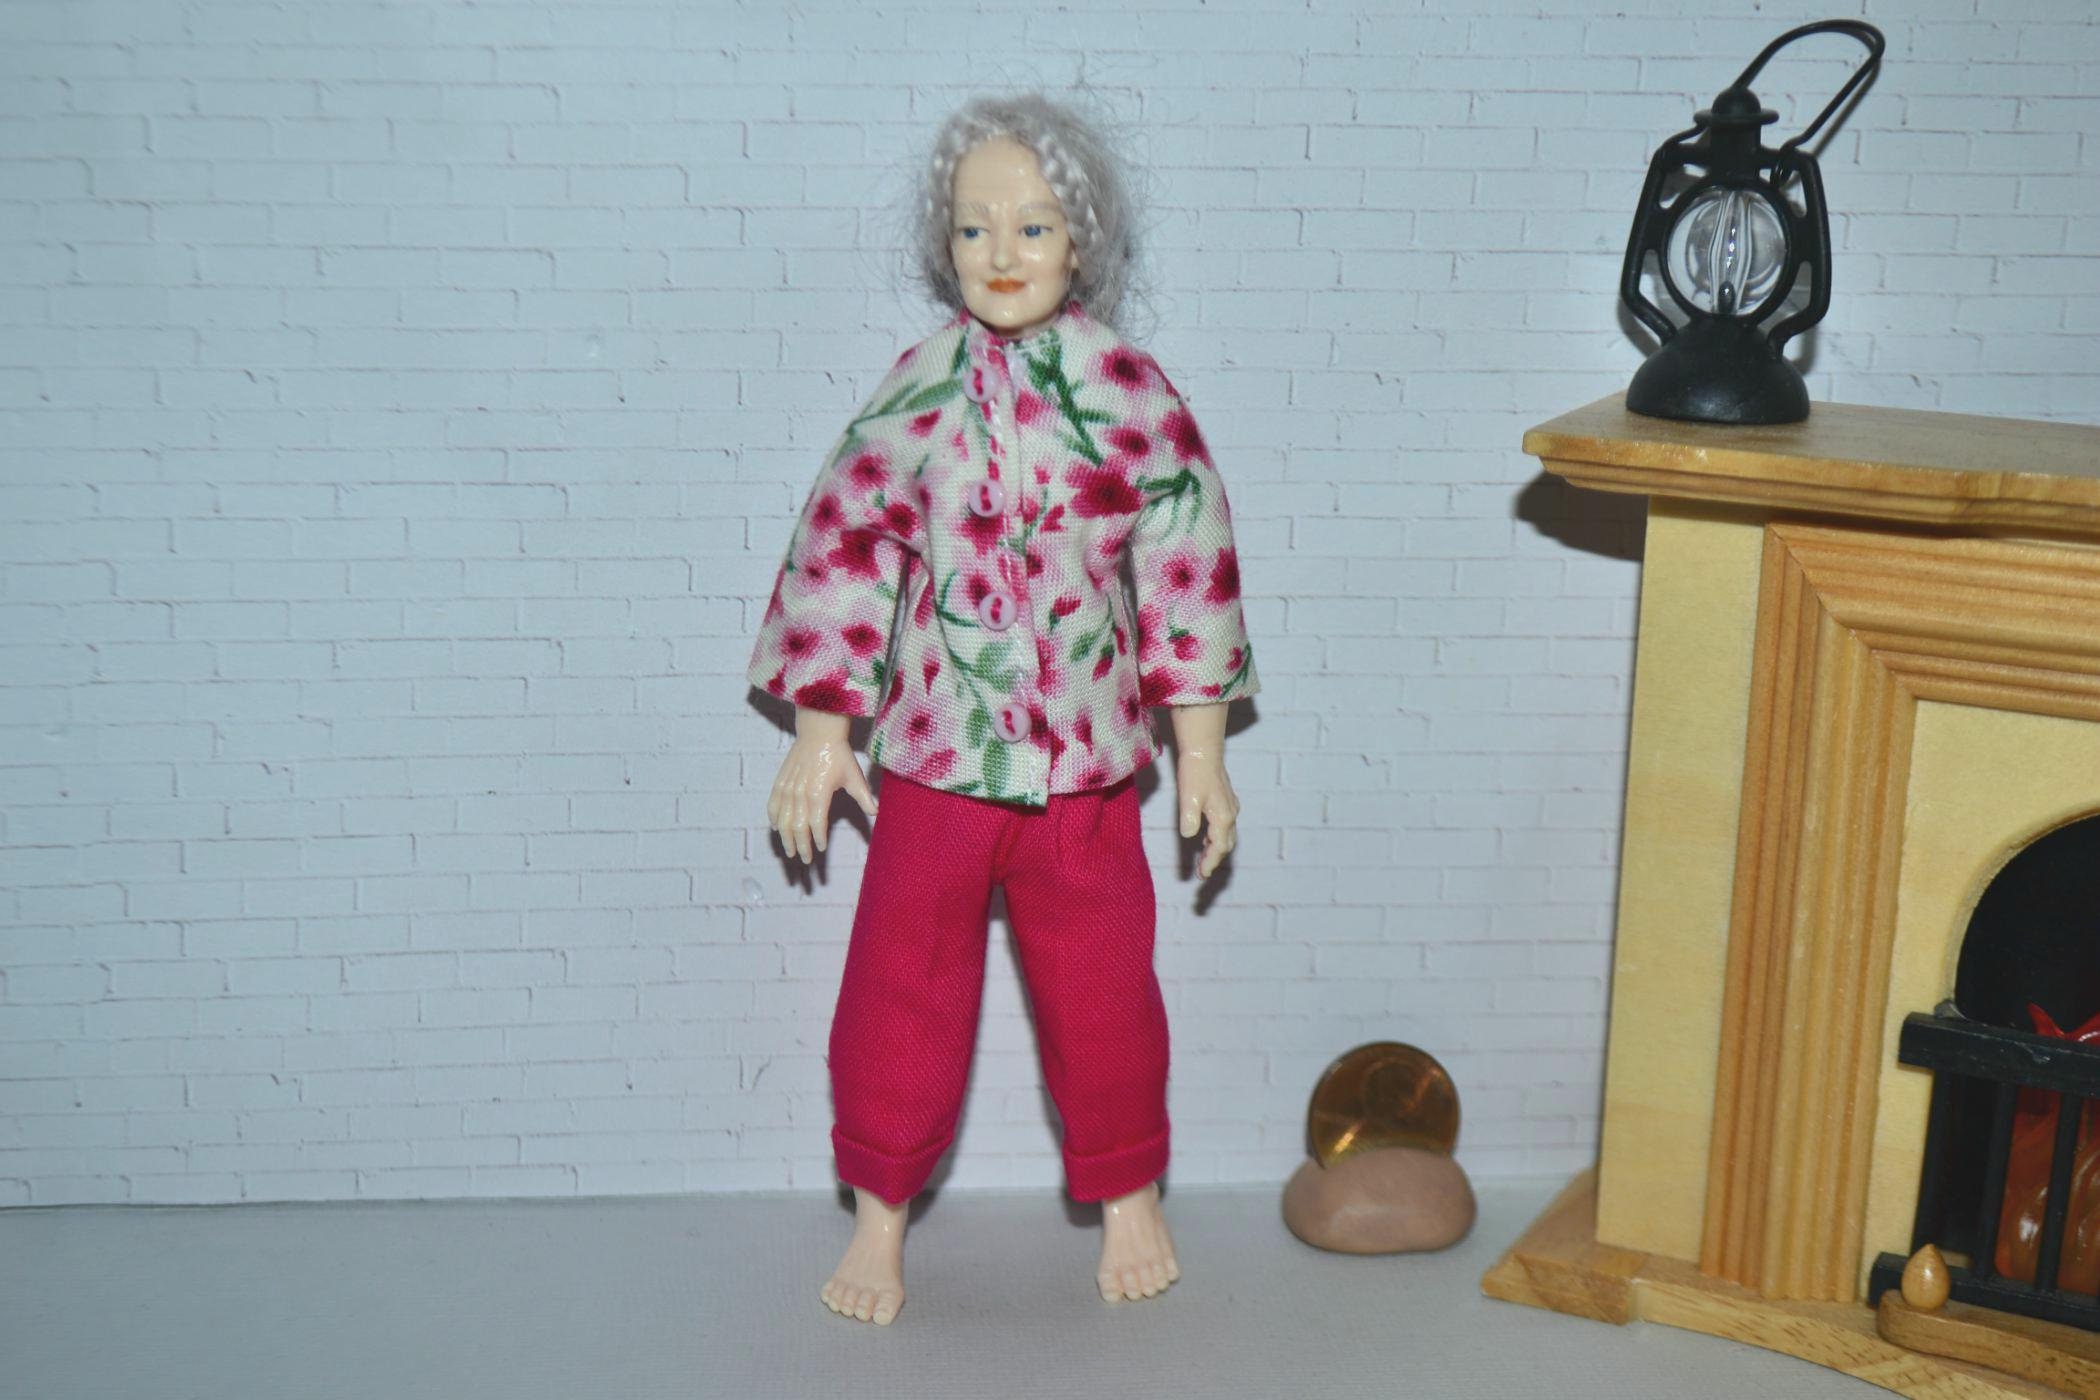 1/12 Scale Doll Clothes For Heidi Ott Soft Body Grandma Old Lady Doll Handmade 2 Pieces Shirt top & Pants